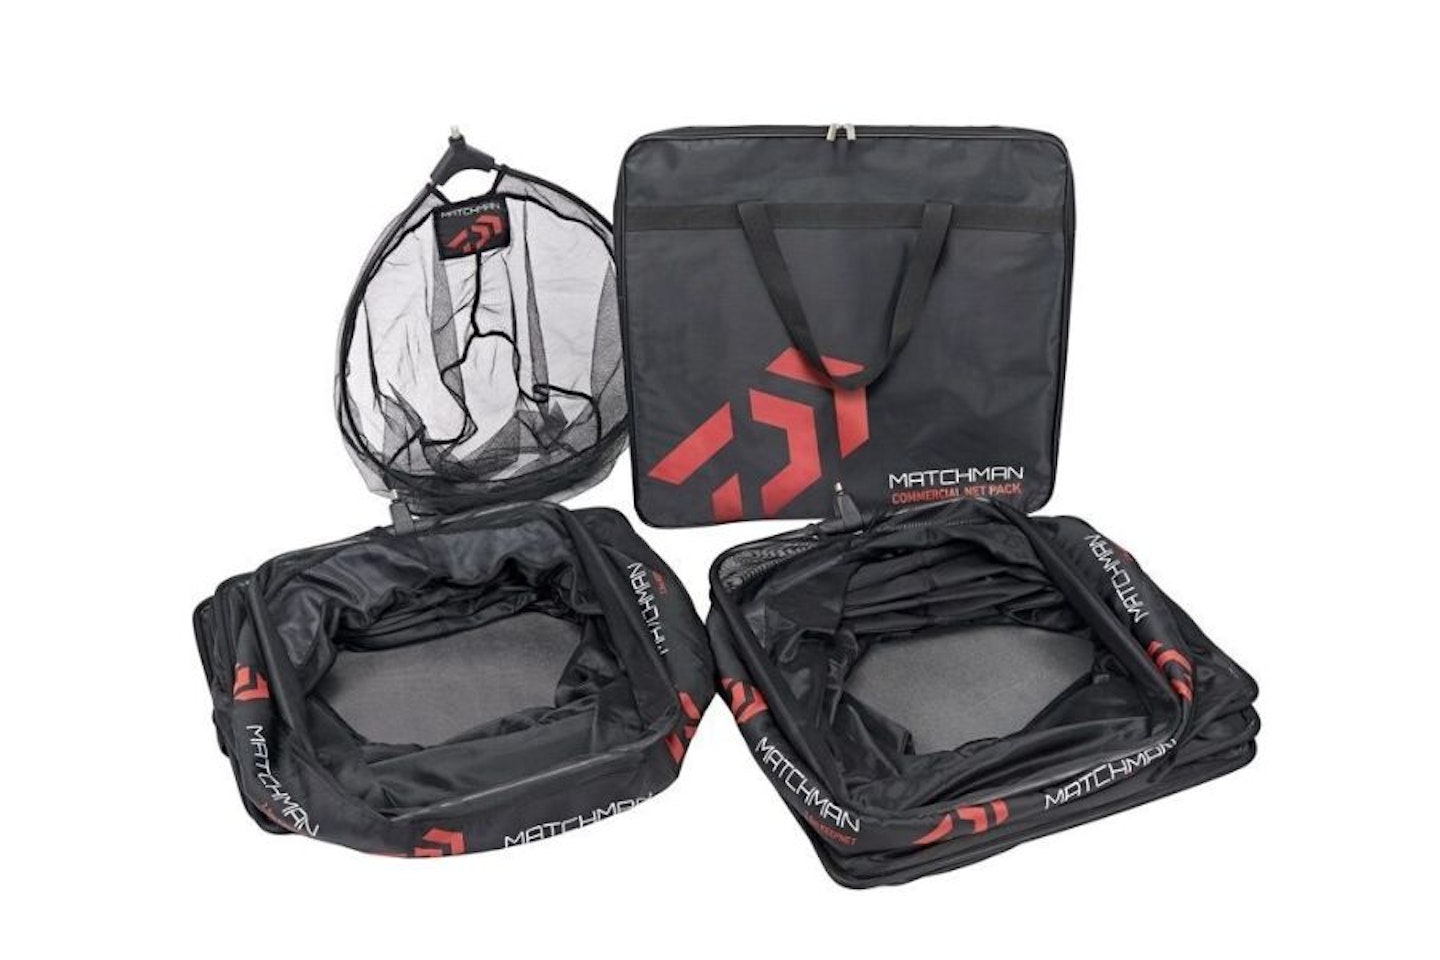 Daiwa Matchman Commercial Net Pack